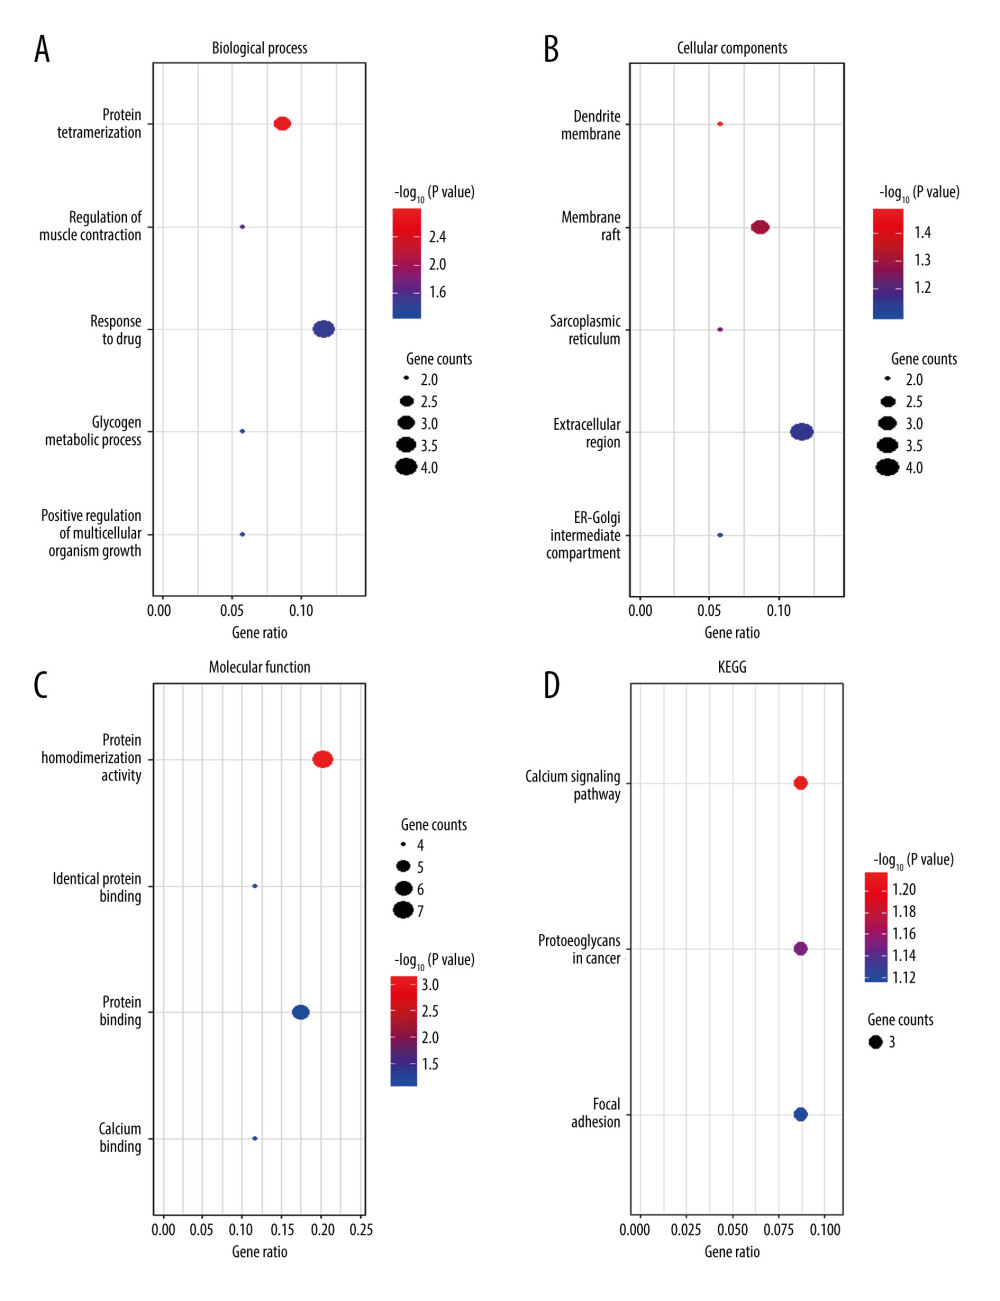 Functional enrichment analysis of common differentially expressed genes (DEGs) between GSE2884 and GSE24982 at the late stage after spinal nerve ligation. (A) Biological process enriched in Gene Ontology (GO) analyses. (B) Cellular components enriched in GO analyses. (C) Molecular function enriched in GO analyses. (D) Enriched Kyoto Encyclopedia of Genes and Genomes (KEGG) pathways. The bubble charts were created by using R software with ggplot2. The dot size represents the number of enriched DEGs. The dot color represents −log10 (P value).